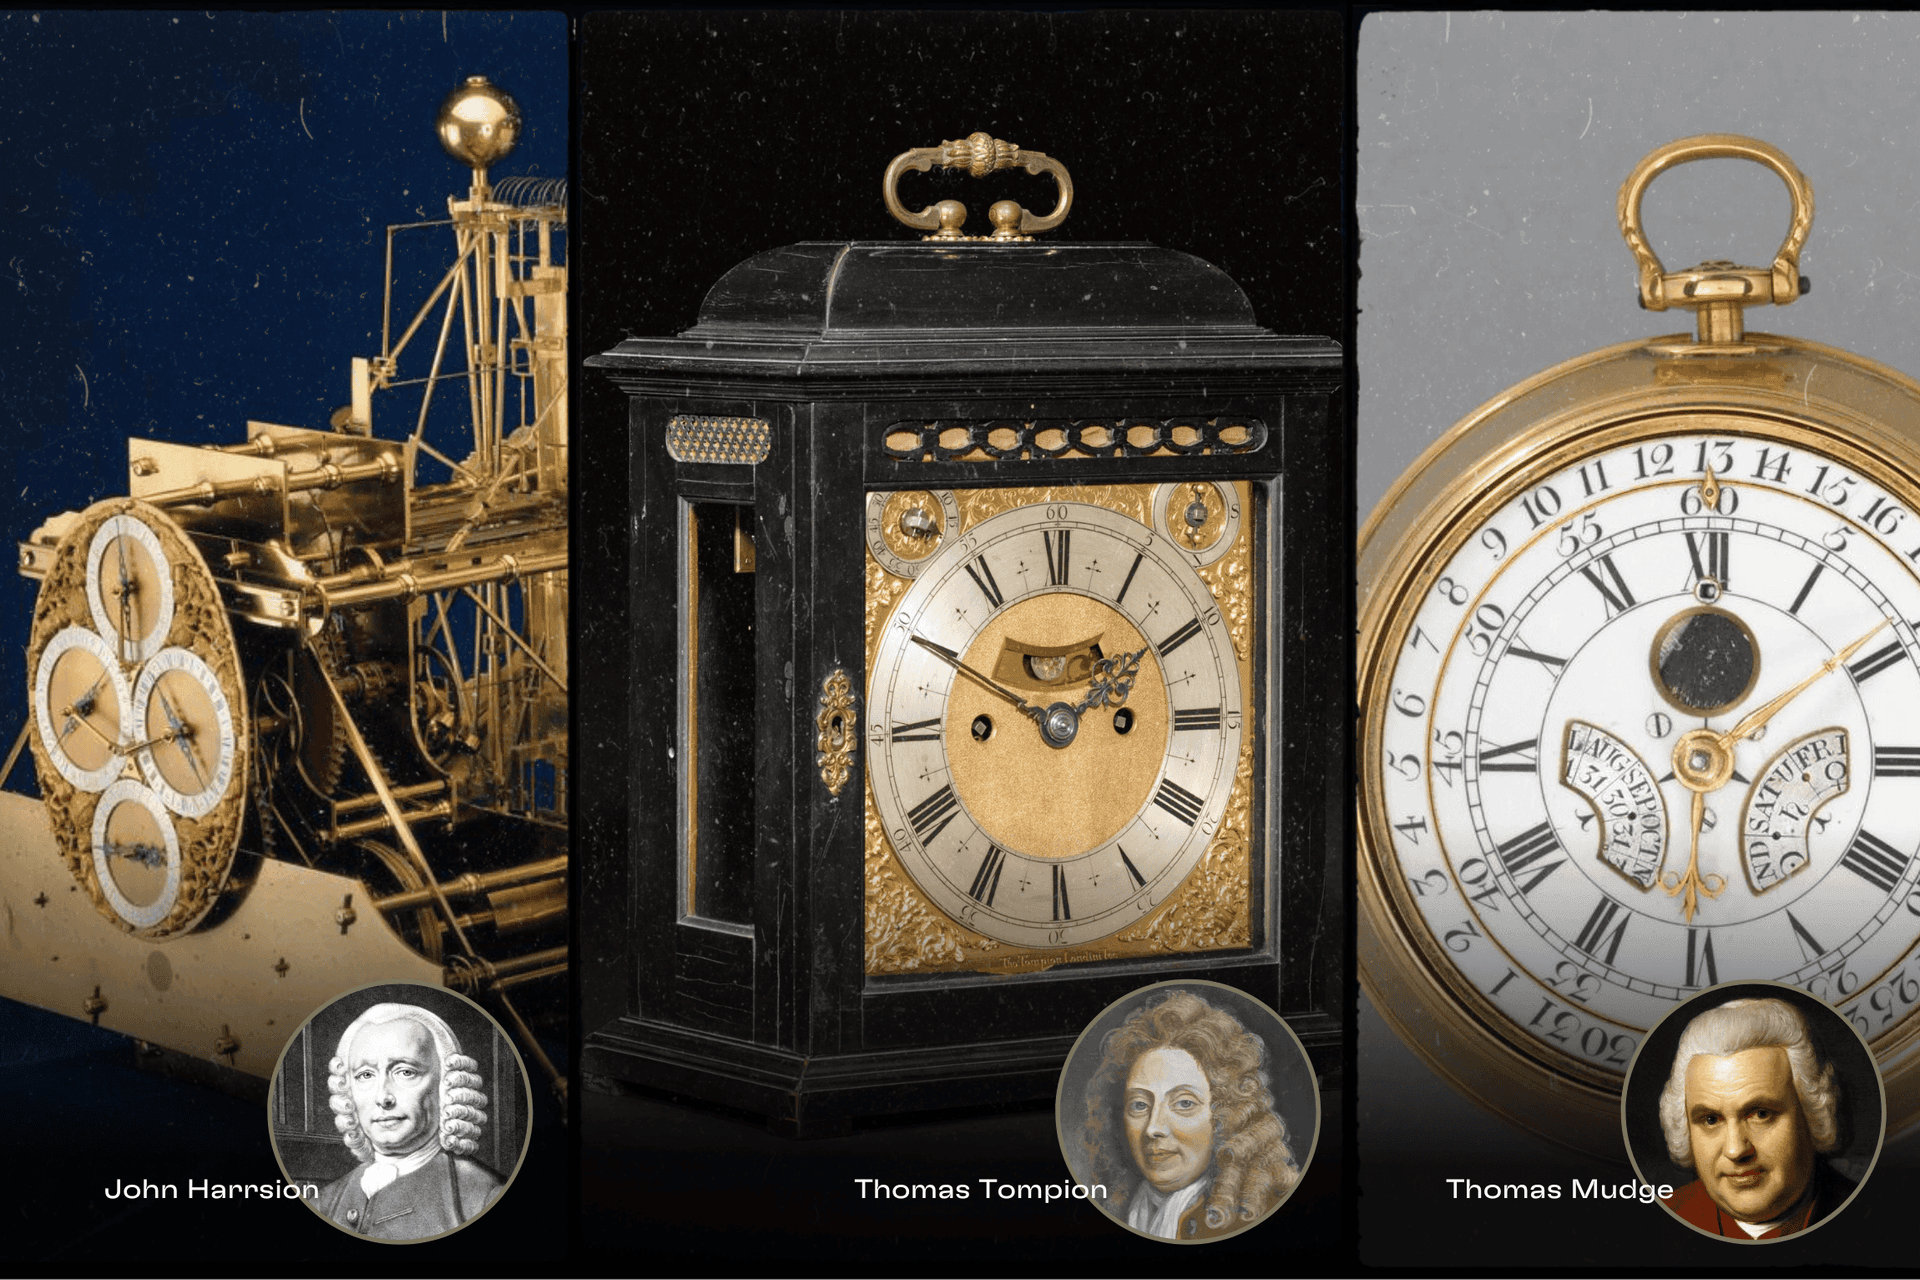 English watchmakers like Thomas Tompion, John Harrsion and Thomas Mudge introduced some of the most revolutionary innovations